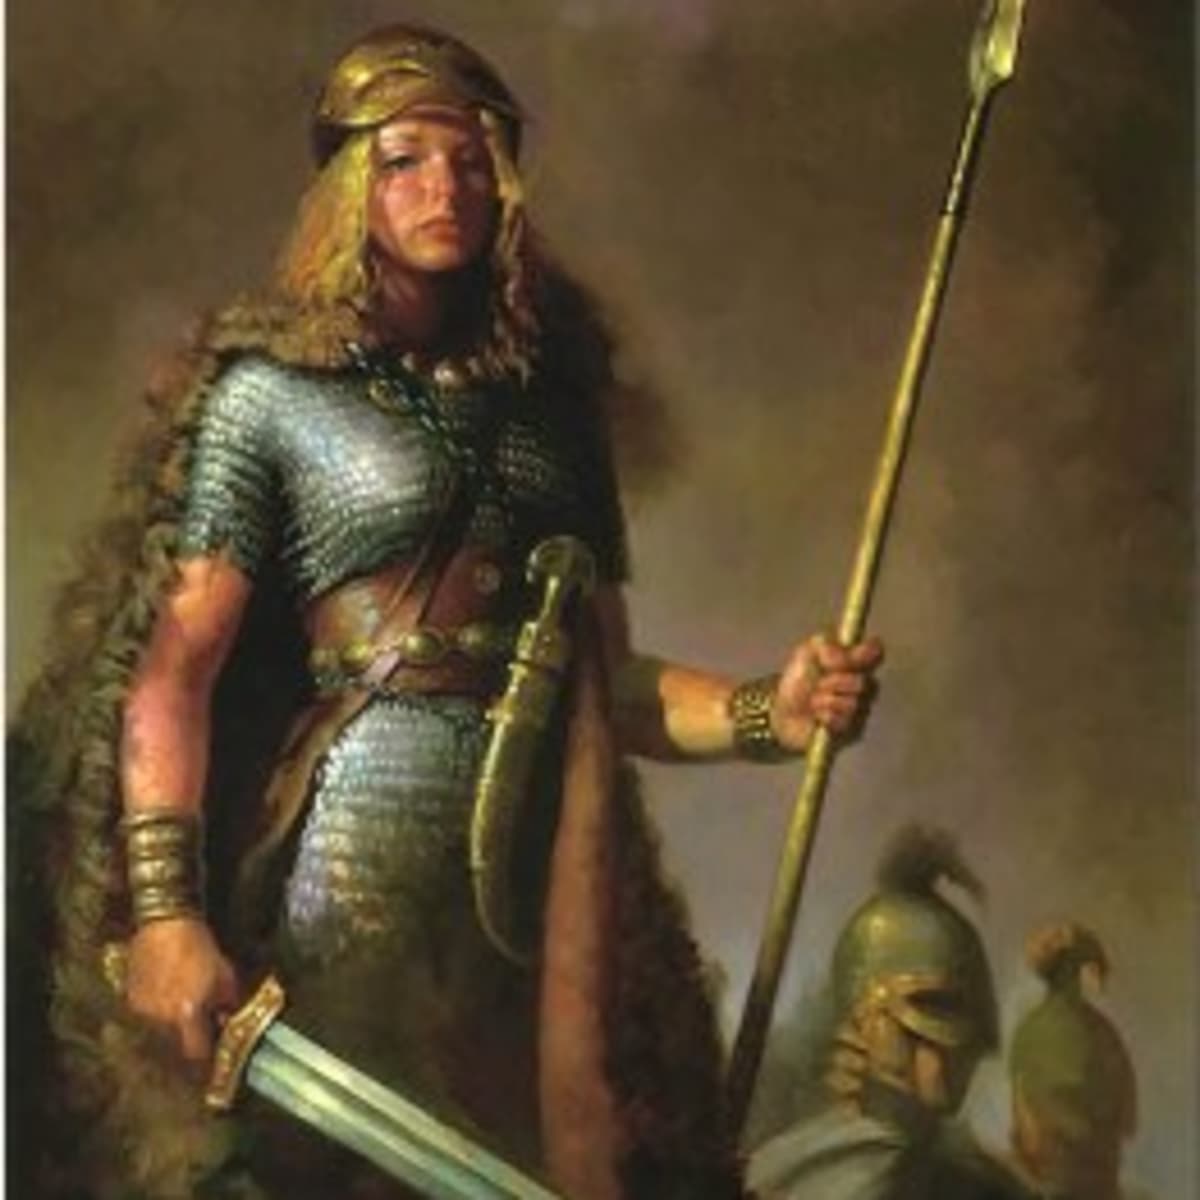 Were shieldmaidens real, or are they an attempt to feminize